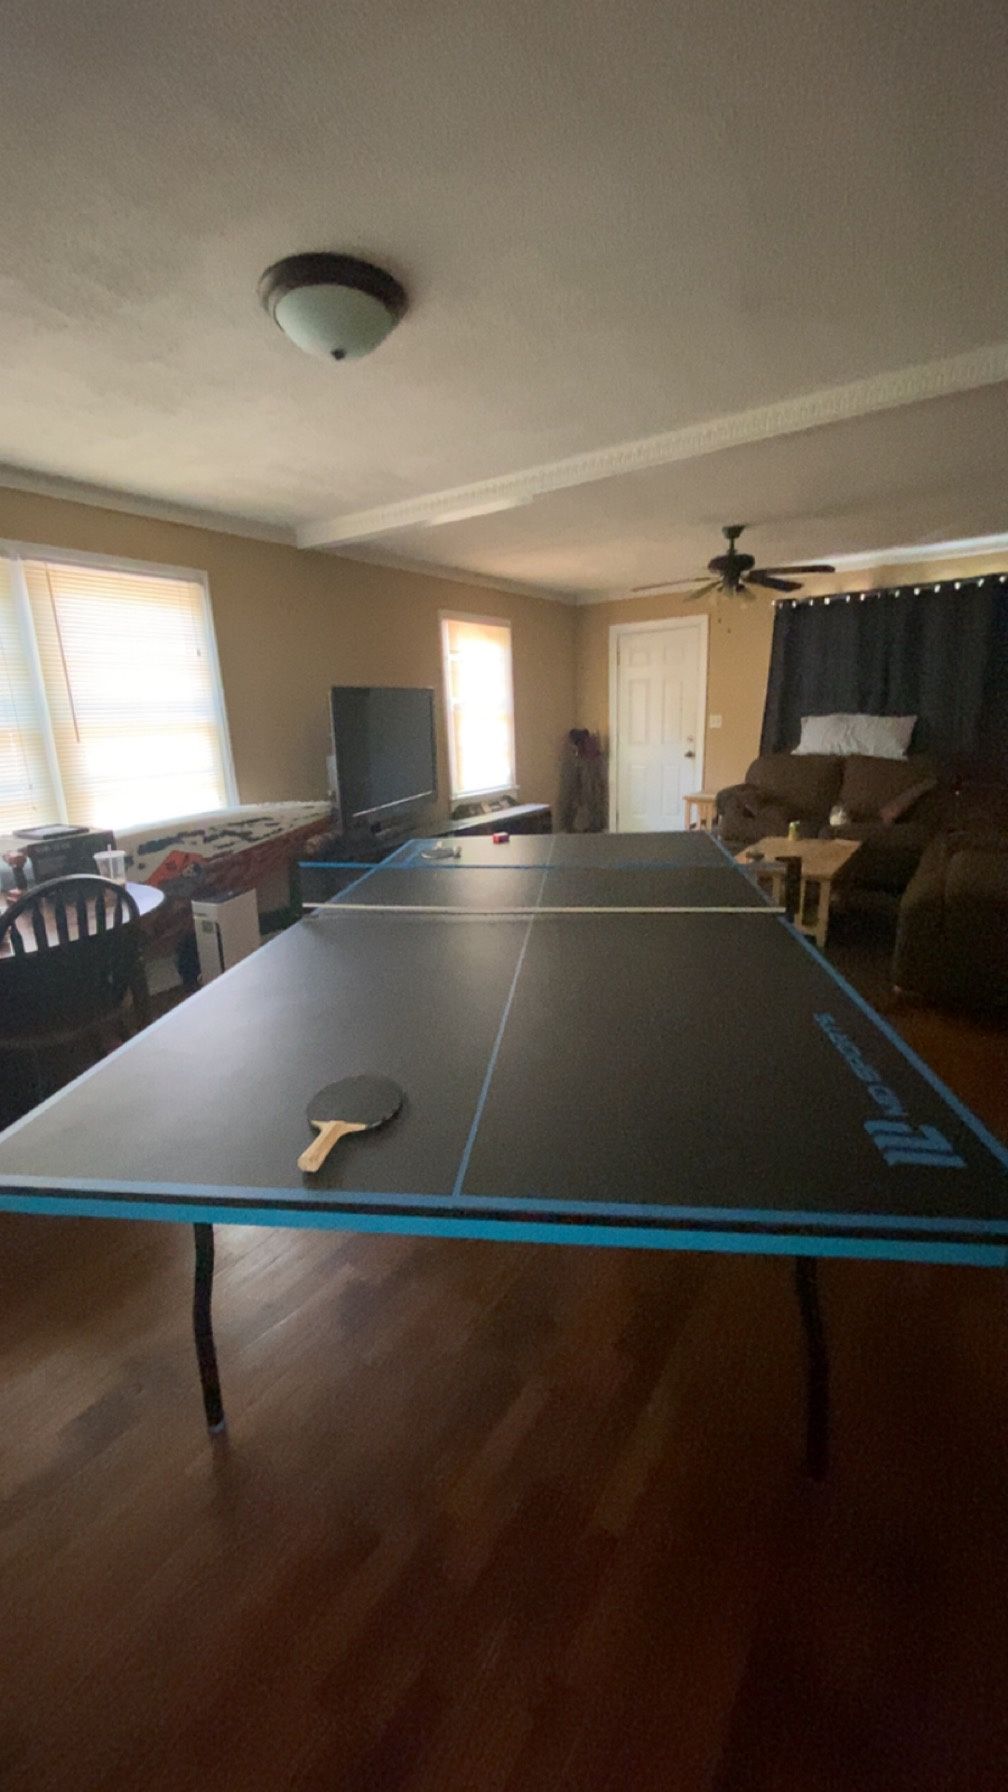 MD Sports Ping Pong Table / Black And Blue / Foldable / 8x6